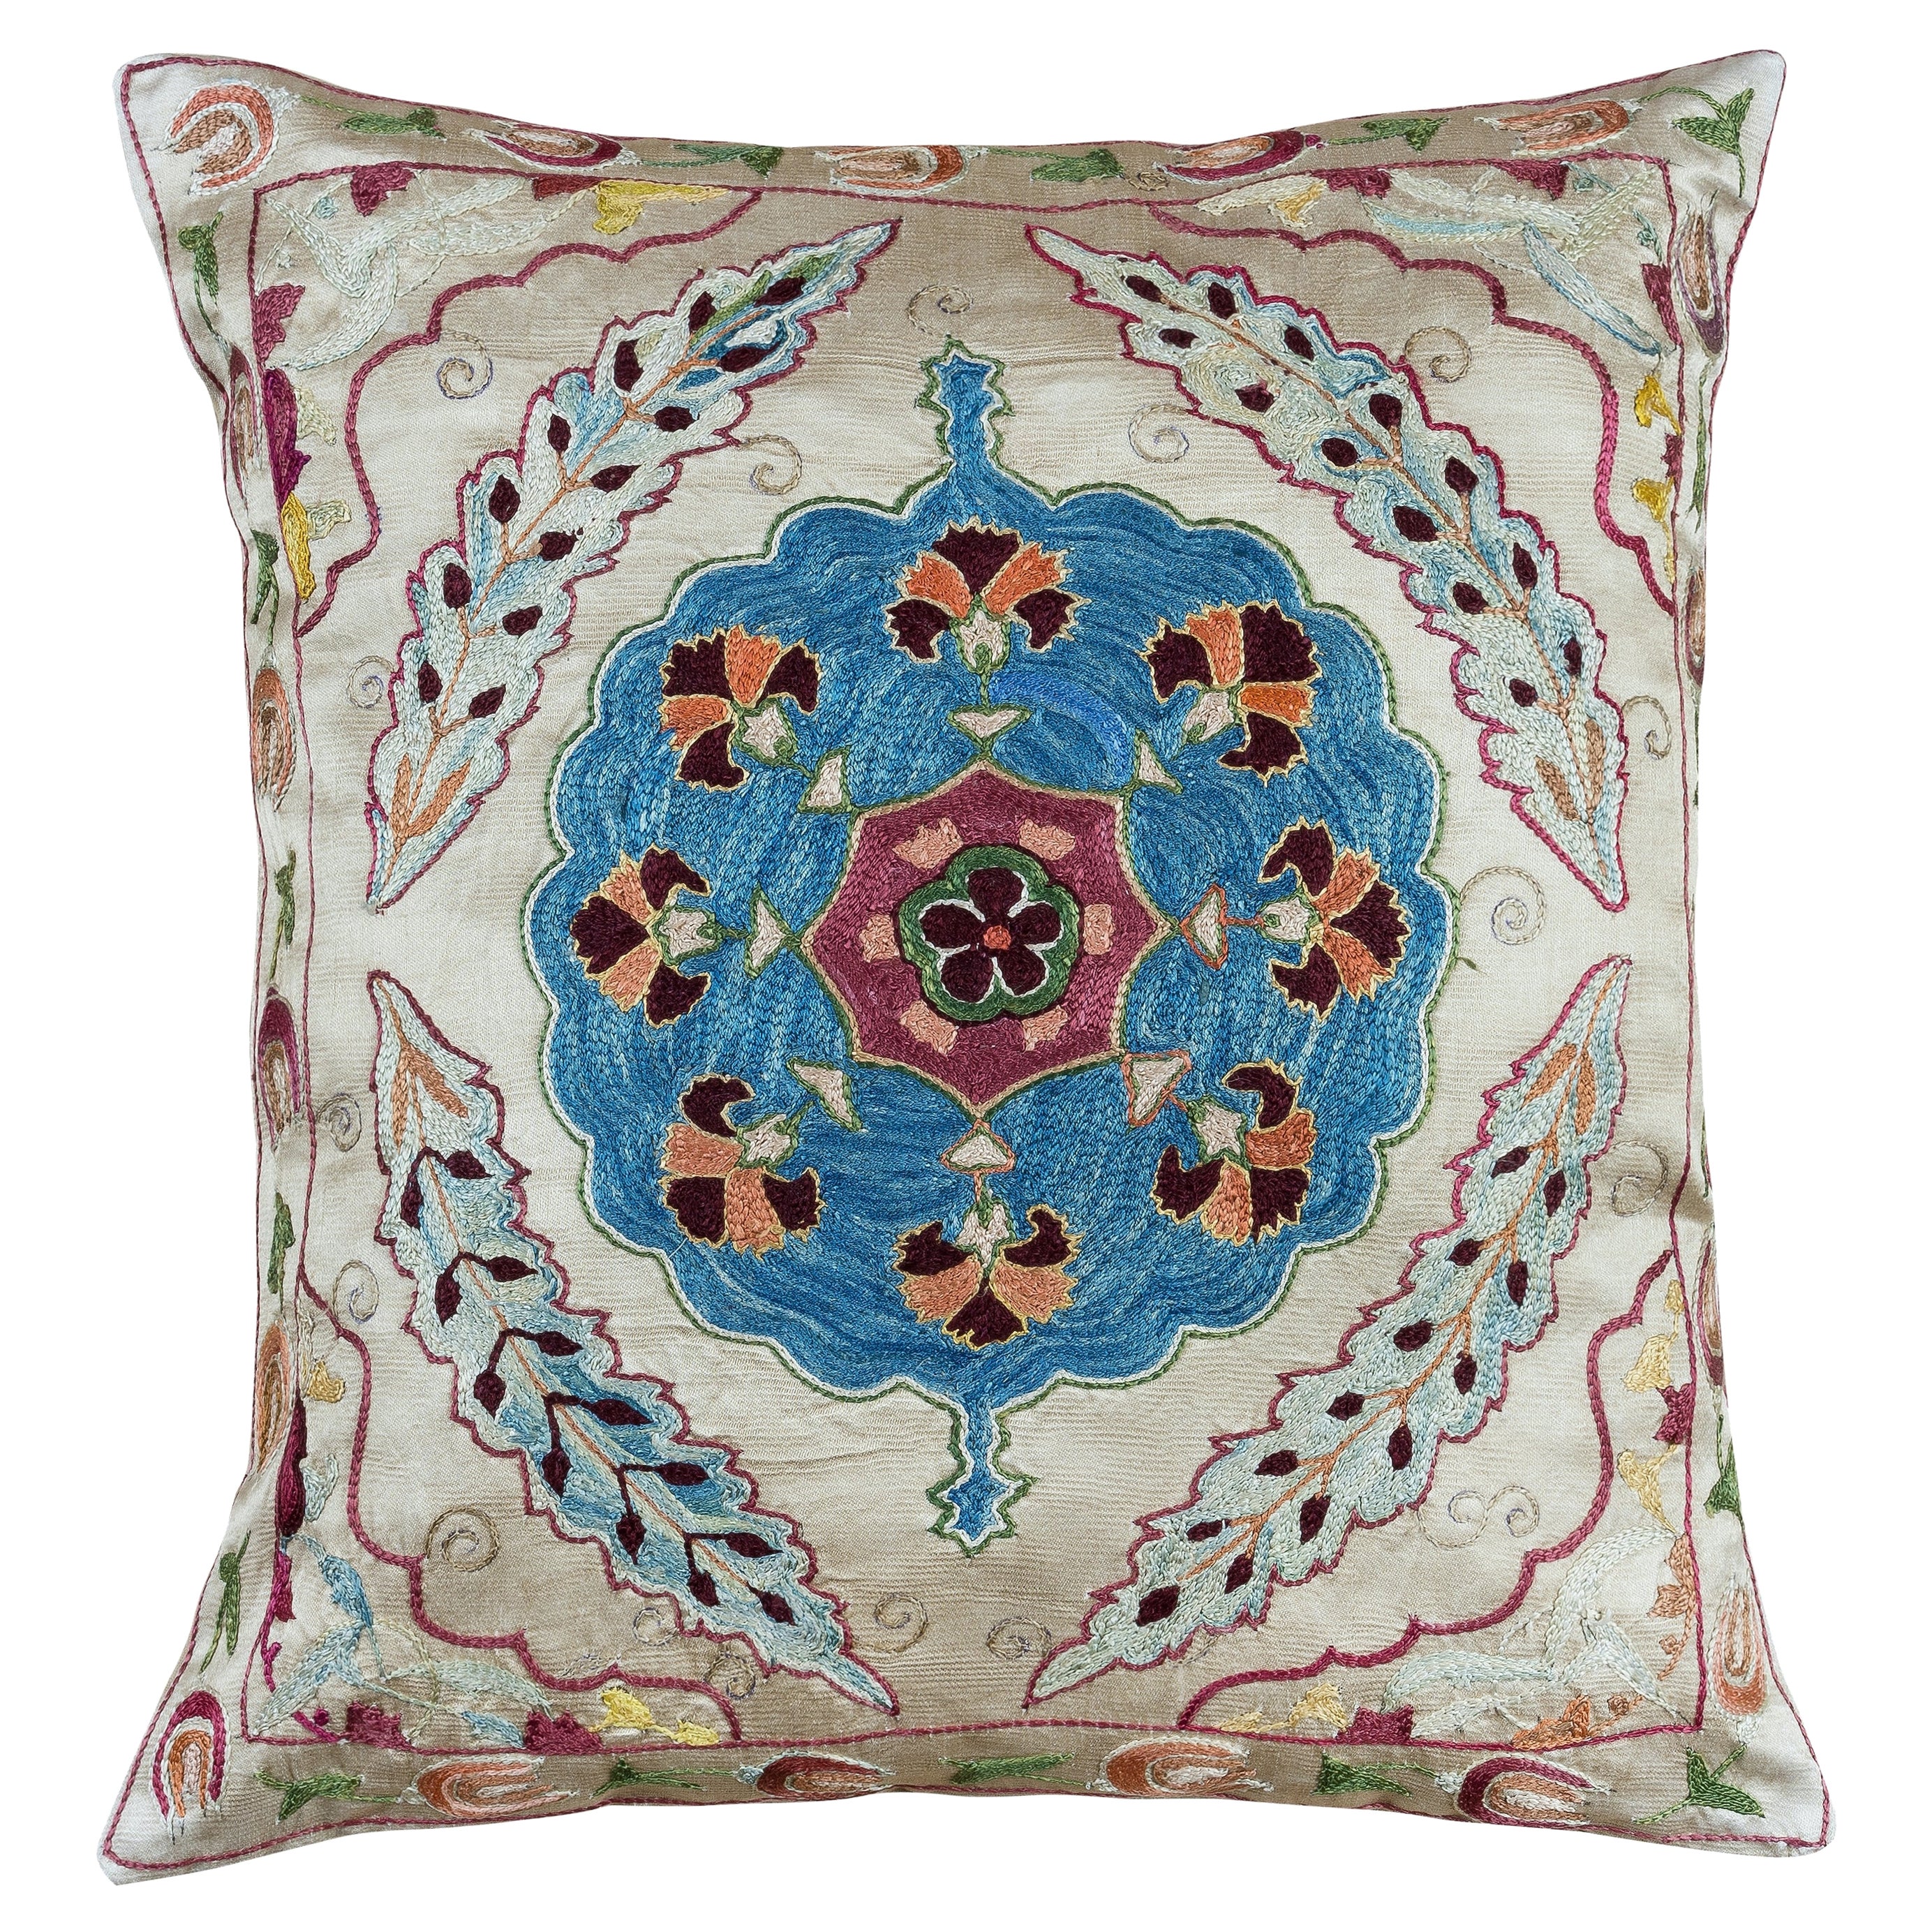 Hand Embroidered 100% Silk Cushion Cover, Suzani Accent Throw Pillow, 18" x 20"